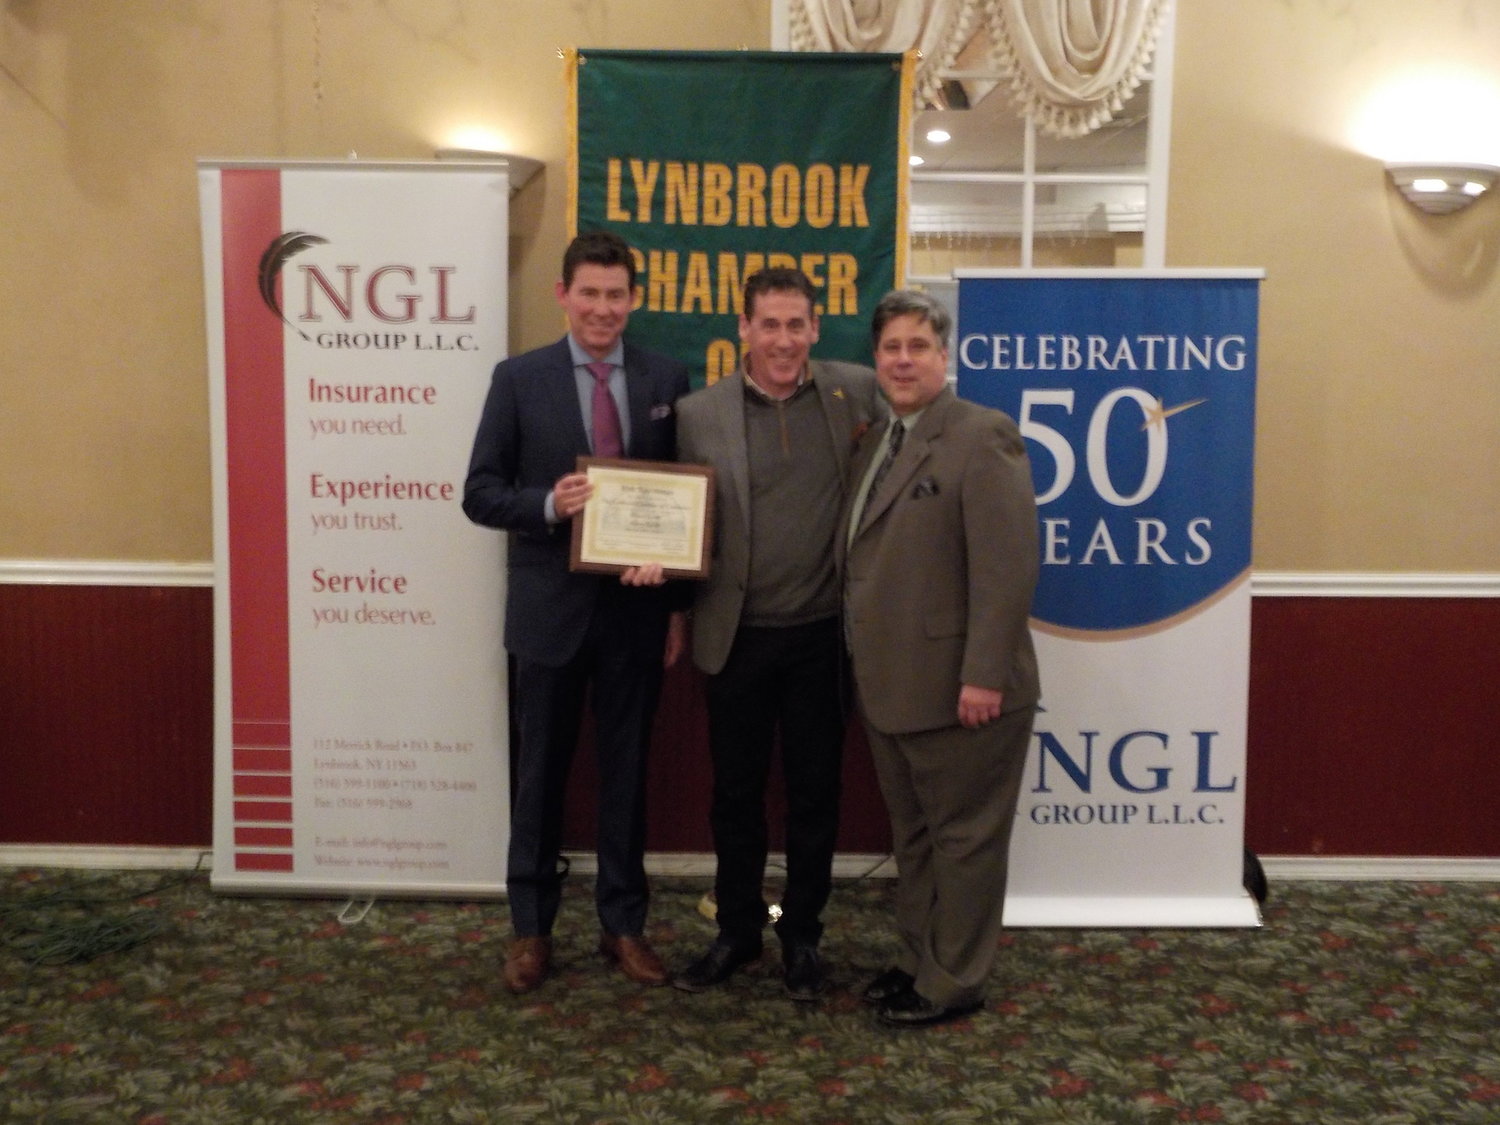 Bruce Levitt, left, and his brother, Harry, center, were honored when their business celebrated 70 years in 2017. With them was former Lynbrook Chamber of Commerce President Stephen Wangel.